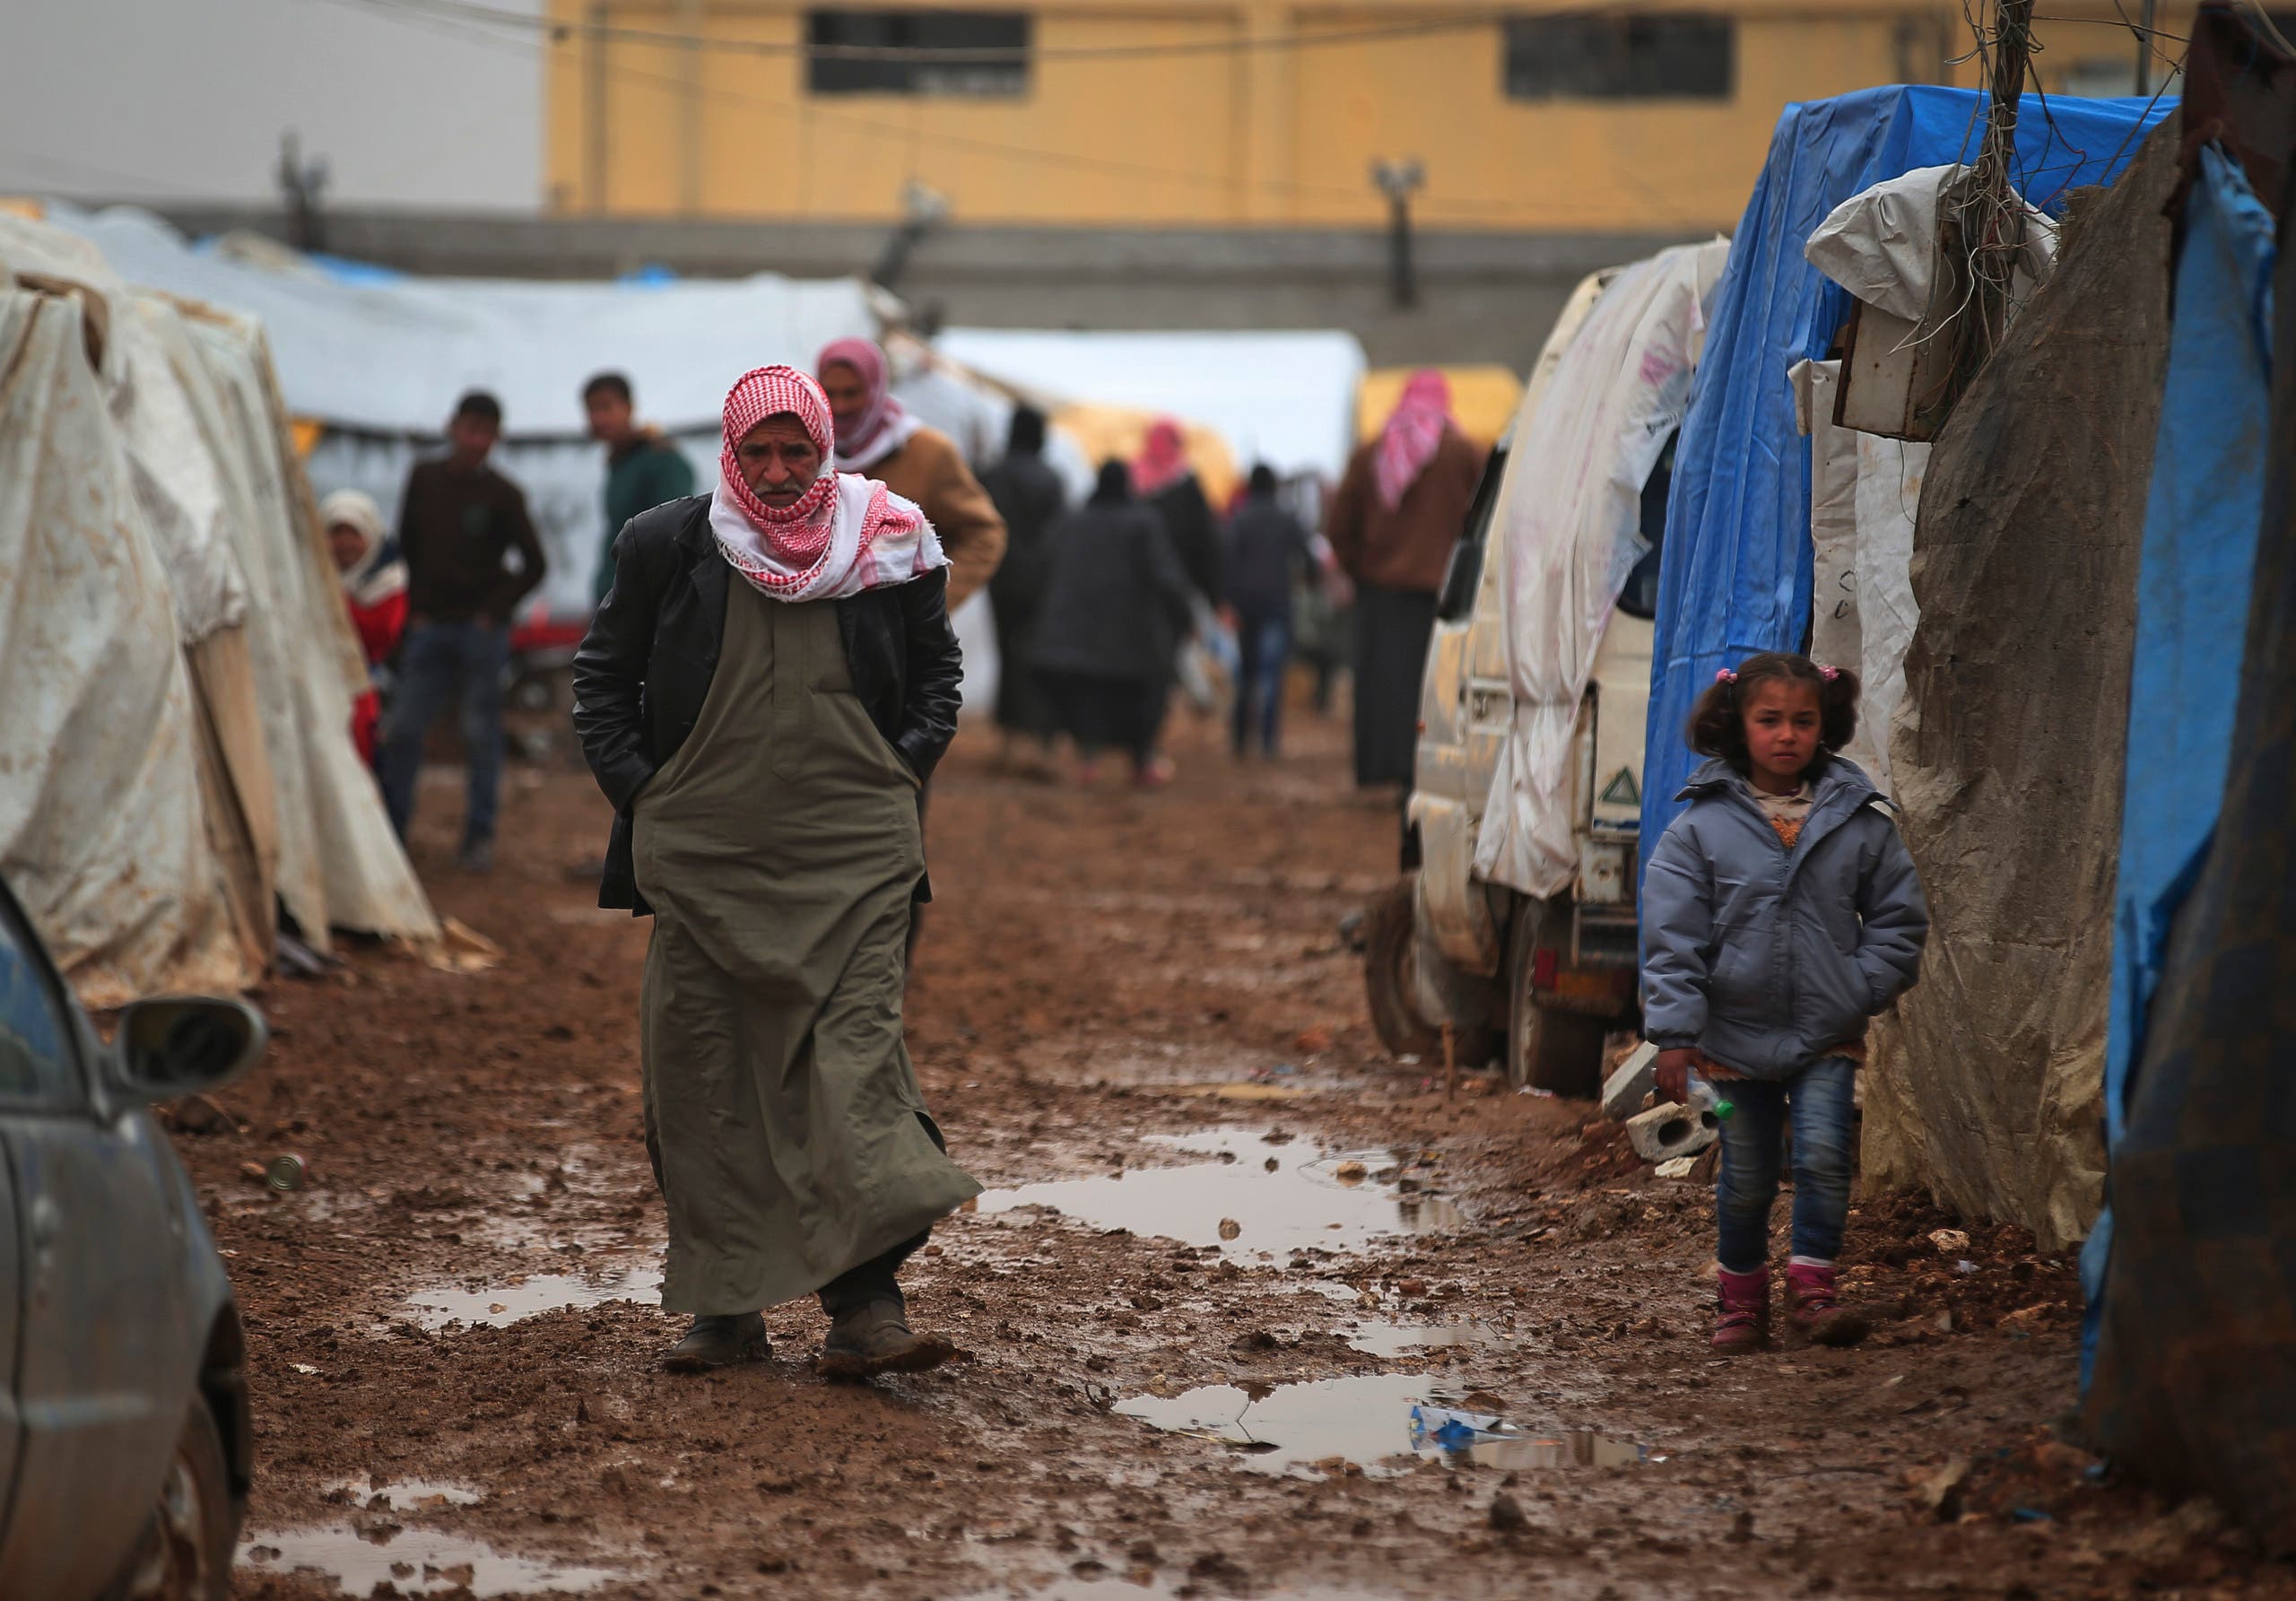  Syrian walk at a camp near the Bab al-Salam border crossing with Turkey, in Syria, Saturday, Feb. 6, 2016. Thousands of Syrians have rushed toward the Turkish border, fleeing fierce Syrian government offensives and intense Russian airstrikes. Turkey has promised humanitarian help for the displaced civilians, including food and shelter, but it did not say whether it would let them cross into the country. (AP Photo/Bunyamin Aygun) TURKEY OUT